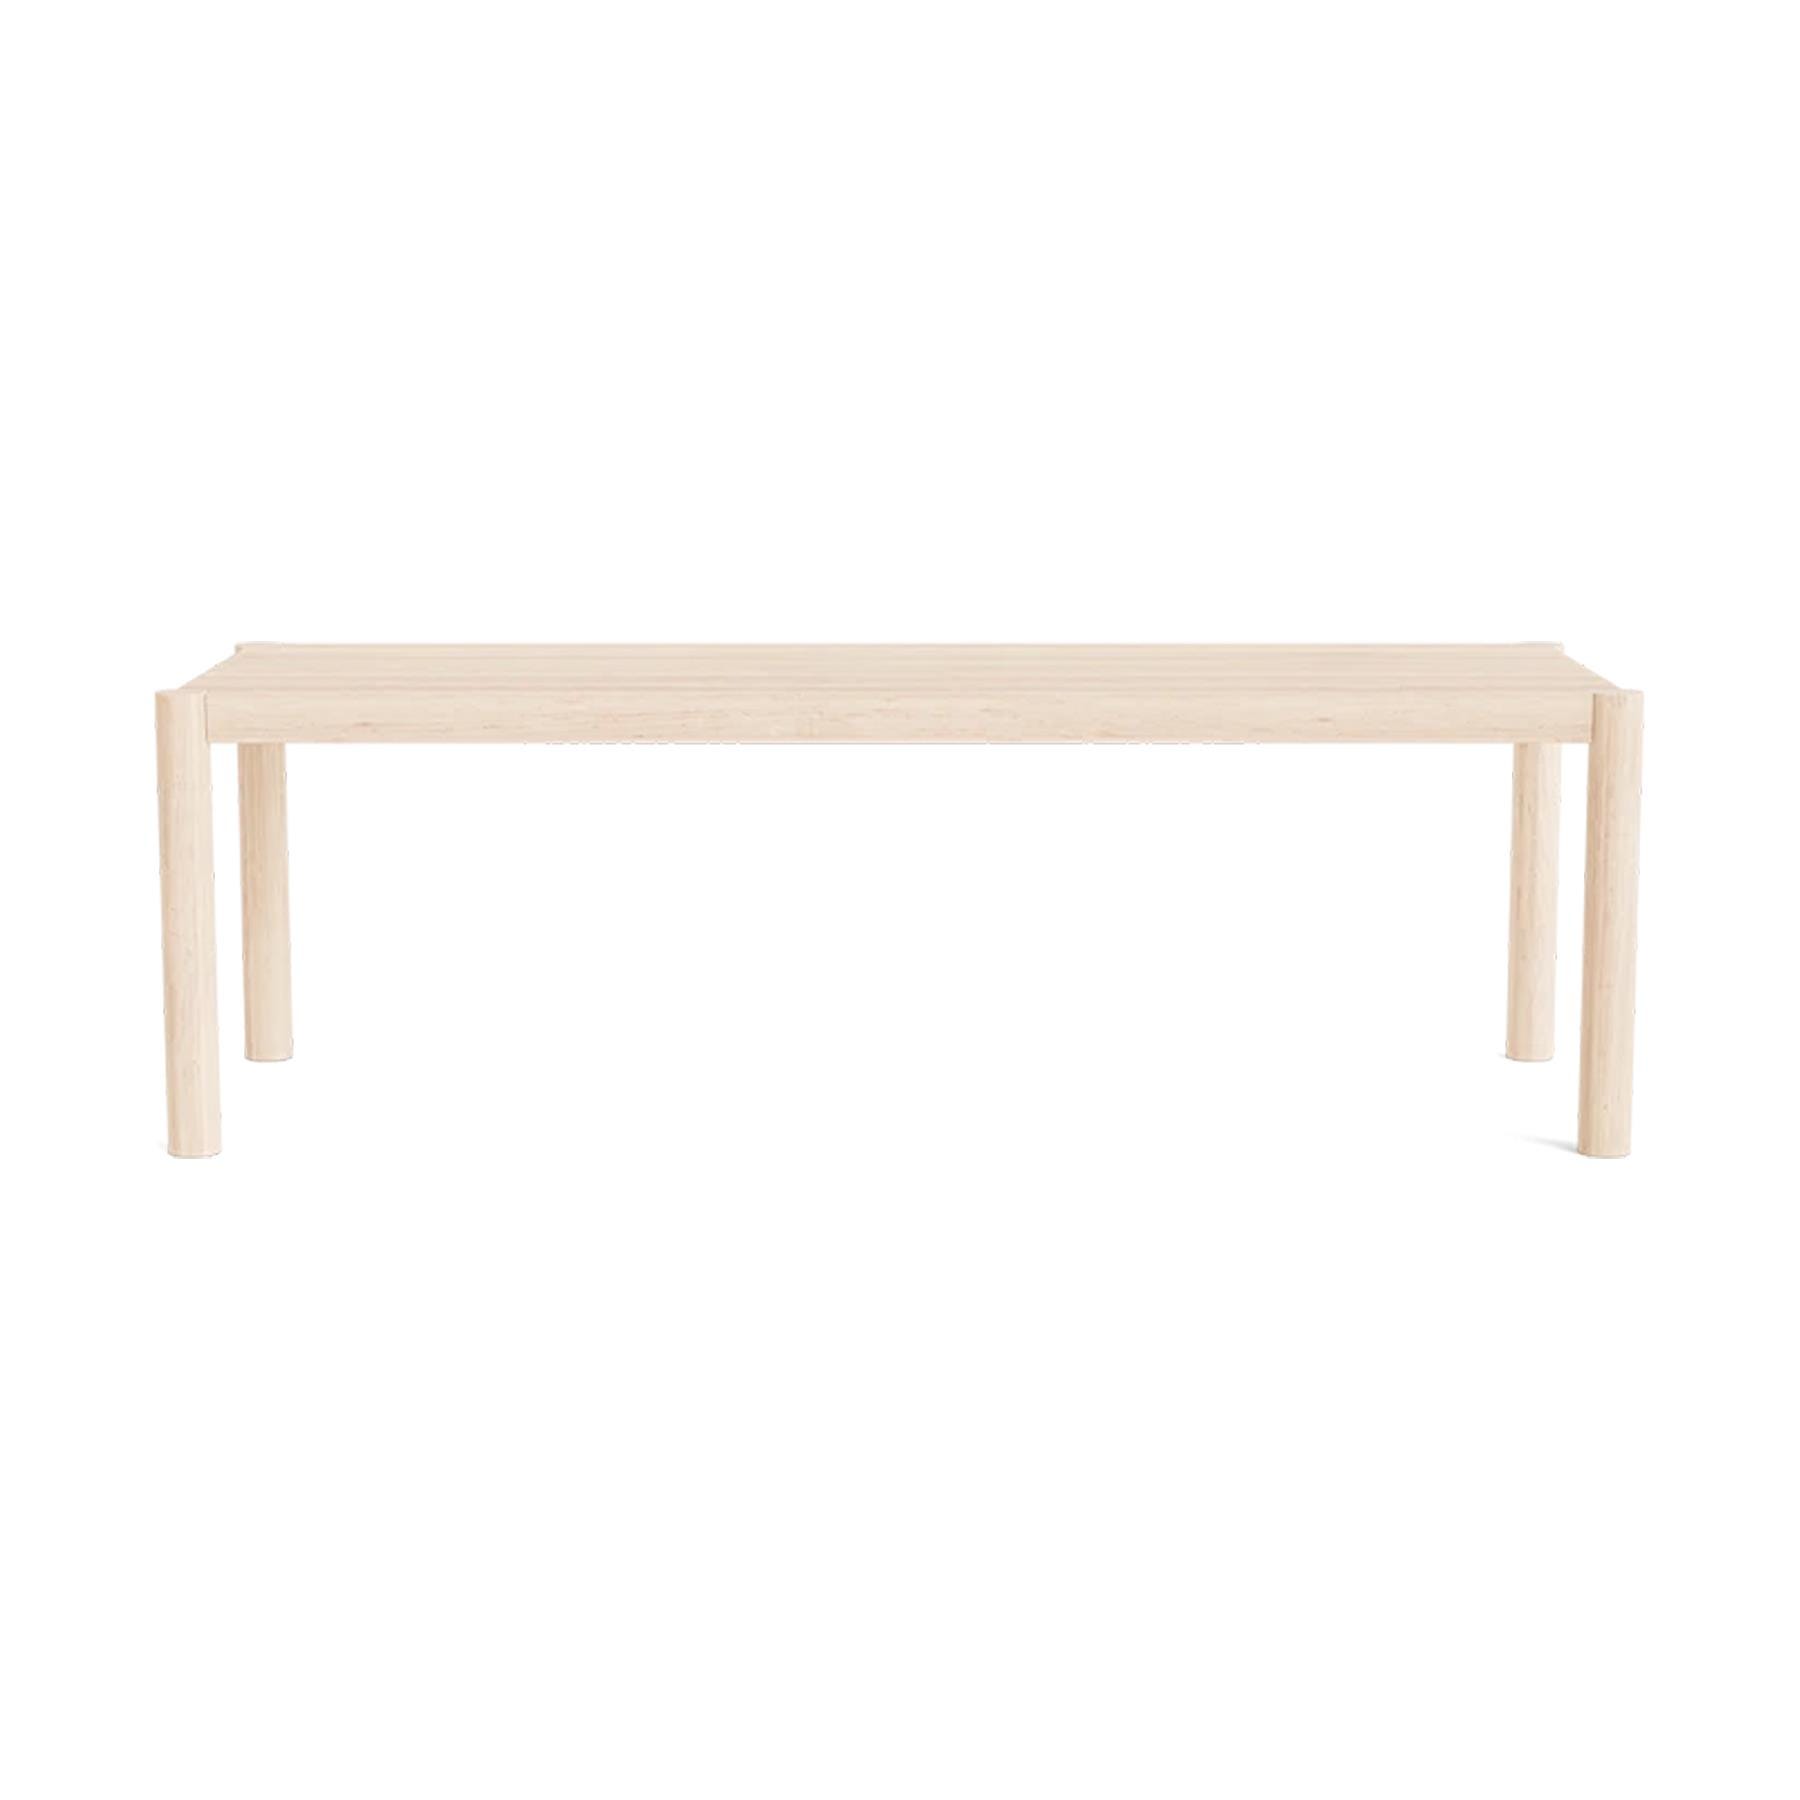 Make Nordic Tammi Coffee Table Rectangle Height 45cm Oak White Oil Light Wood Designer Furniture From Holloways Of Ludlow